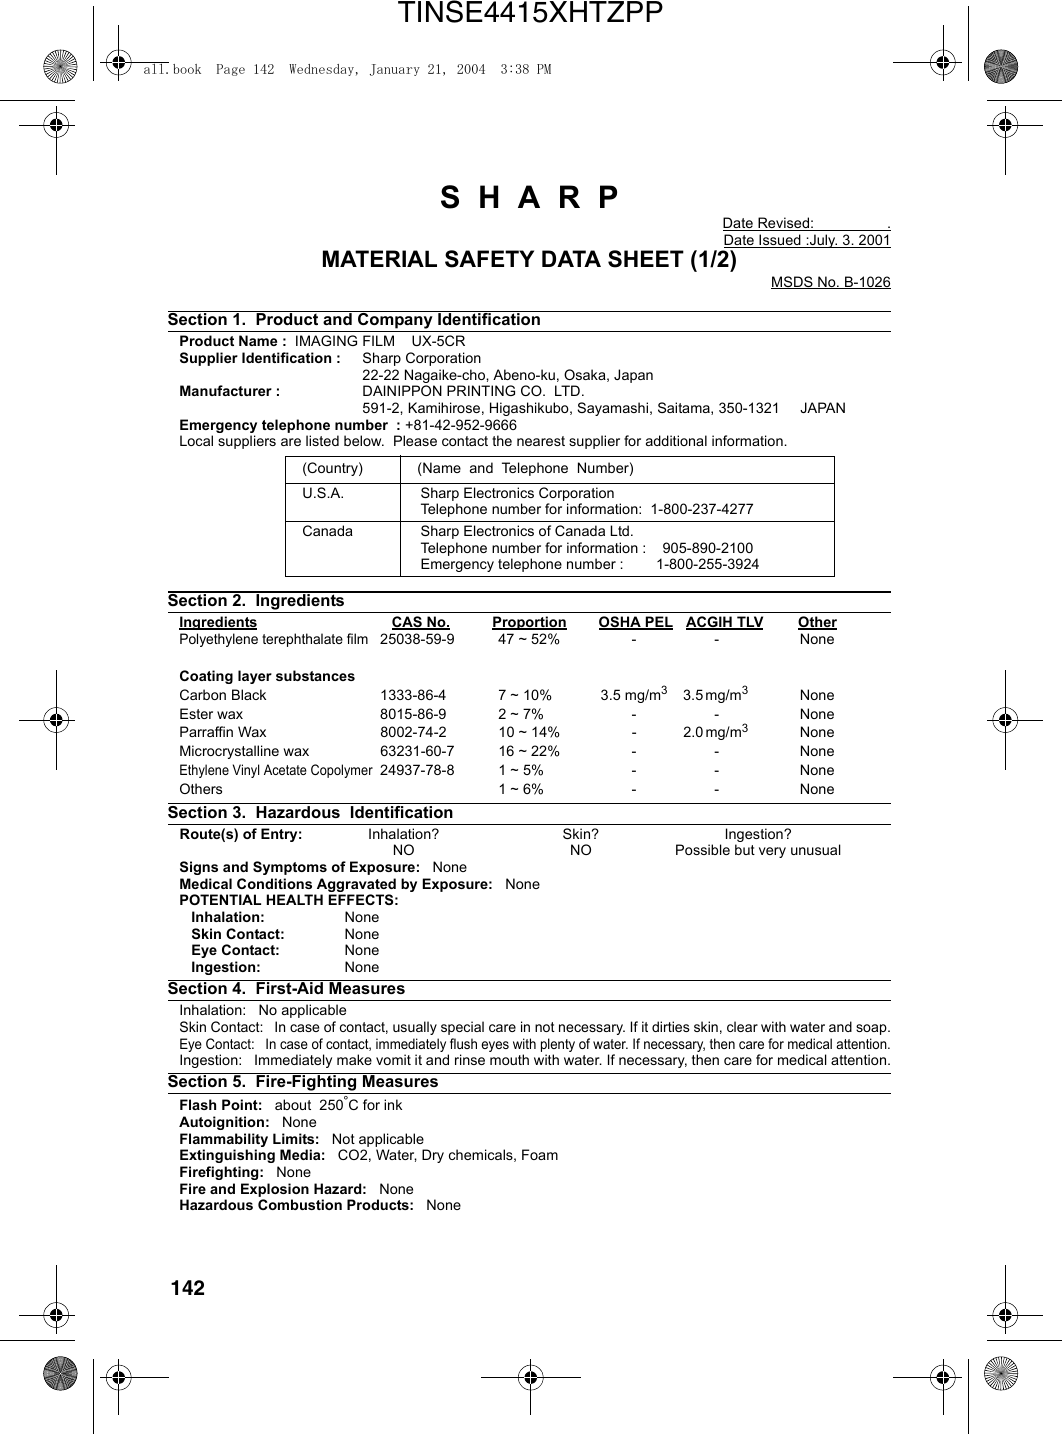 142S  H  A  R  PDate Revised:                  .Date Issued :July. 3. 2001MATERIAL SAFETY DATA SHEET (1/2)MSDS No. B-1026Section 1.  Product and Company IdentificationProduct Name :  IMAGING FILM    UX-5CR Supplier Identification : Sharp Corporation22-22 Nagaike-cho, Abeno-ku, Osaka, JapanManufacturer : DAINIPPON PRINTING CO.  LTD.591-2, Kamihirose, Higashikubo, Sayamashi, Saitama, 350-1321     JAPANEmergency telephone number  : +81-42-952-9666Local suppliers are listed below.  Please contact the nearest supplier for additional information.Section 2.  IngredientsIngredients CAS No. Proportion OSHA PEL ACGIH TLV OtherPolyethylene terephthalate film25038-59-9 47 ~ 52% - - NoneCoating layer substancesCarbon Black 1333-86-4 7 ~ 10% 3.5 mg/m33.5 mg/m3 NoneEster wax 8015-86-9 2 ~ 7% - - NoneParraffin Wax   8002-74-2 10 ~ 14% - 2.0 mg/m3 NoneMicrocrystalline wax 63231-60-7 16 ~ 22% - - NoneEthylene Vinyl Acetate Copolymer24937-78-8 1 ~ 5% - - NoneOthers 1 ~ 6% - - NoneSection 3.  Hazardous  Identification   Route(s) of Entry: Inhalation? Skin?  Ingestion?NO NO Possible but very unusualSigns and Symptoms of Exposure:   NoneMedical Conditions Aggravated by Exposure:   NonePOTENTIAL HEALTH EFFECTS:   Inhalation: None   Skin Contact: None   Eye Contact: None   Ingestion: NoneSection 4.  First-Aid MeasuresInhalation:   No applicable   Skin Contact:   In case of contact, usually special care in not necessary. If it dirties skin, clear with water and soap.Eye Contact:   In case of contact, immediately flush eyes with plenty of water. If necessary, then care for medical attention.Ingestion:   Immediately make vomit it and rinse mouth with water. If necessary, then care for medical attention.Section 5.  Fire-Fighting MeasuresFlash Point:   about  250°C for inkAutoignition:   NoneFlammability Limits:   Not applicableExtinguishing Media:   CO2, Water, Dry chemicals, FoamFirefighting:   NoneFire and Explosion Hazard:   NoneHazardous Combustion Products:   None(Country) (Name  and  Telephone  Number)U.S.A. Sharp Electronics CorporationTelephone number for information:  1-800-237-4277Canada Sharp Electronics of Canada Ltd.Telephone number for information :    905-890-2100Emergency telephone number :        1-800-255-3924all.book  Page 142  Wednesday, January 21, 2004  3:38 PMTINSE4415XHTZPP